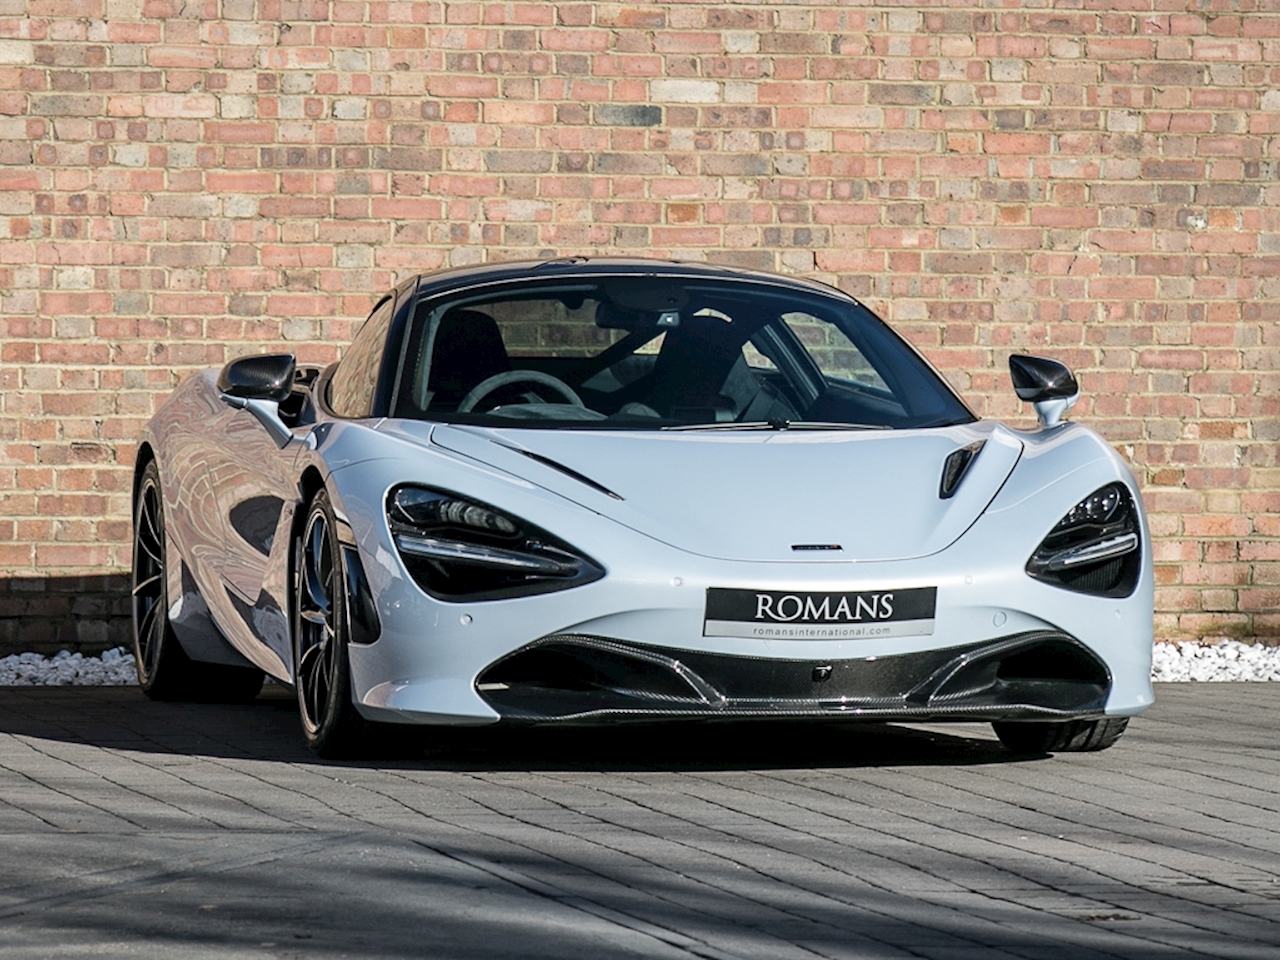 720s black and white